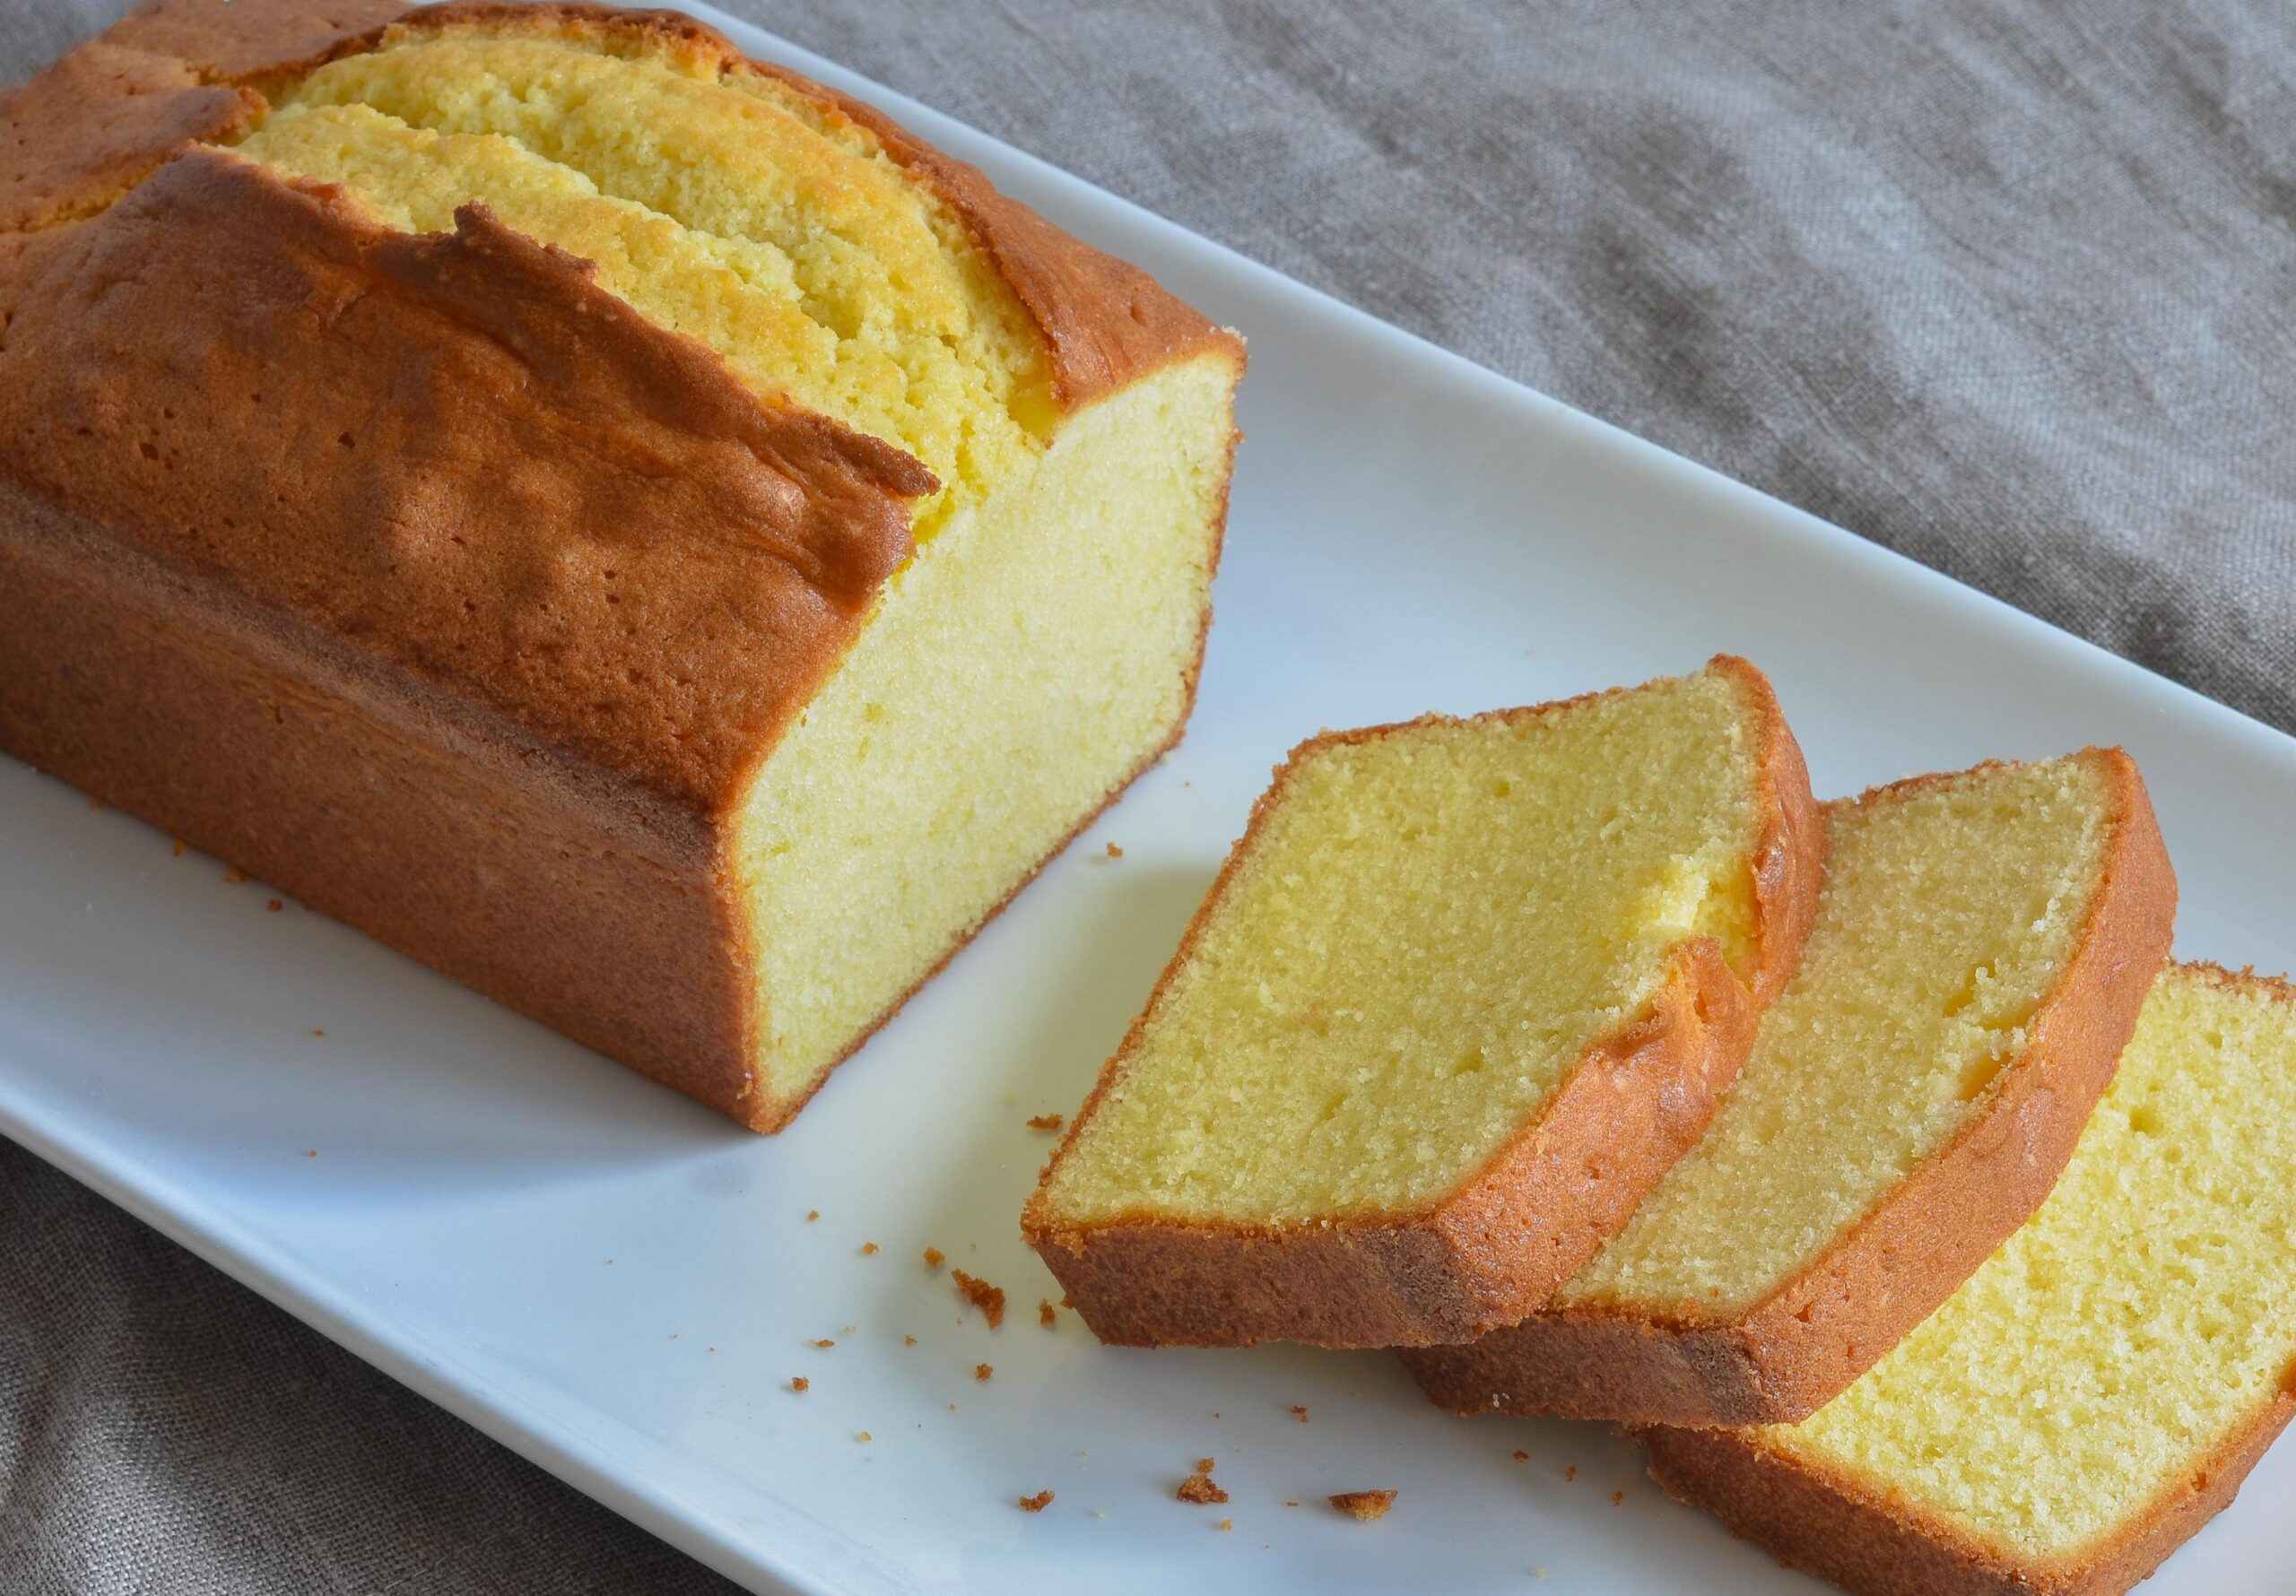  Light, fluffy, and decadent - this is the pound cake you'll fall in love with.